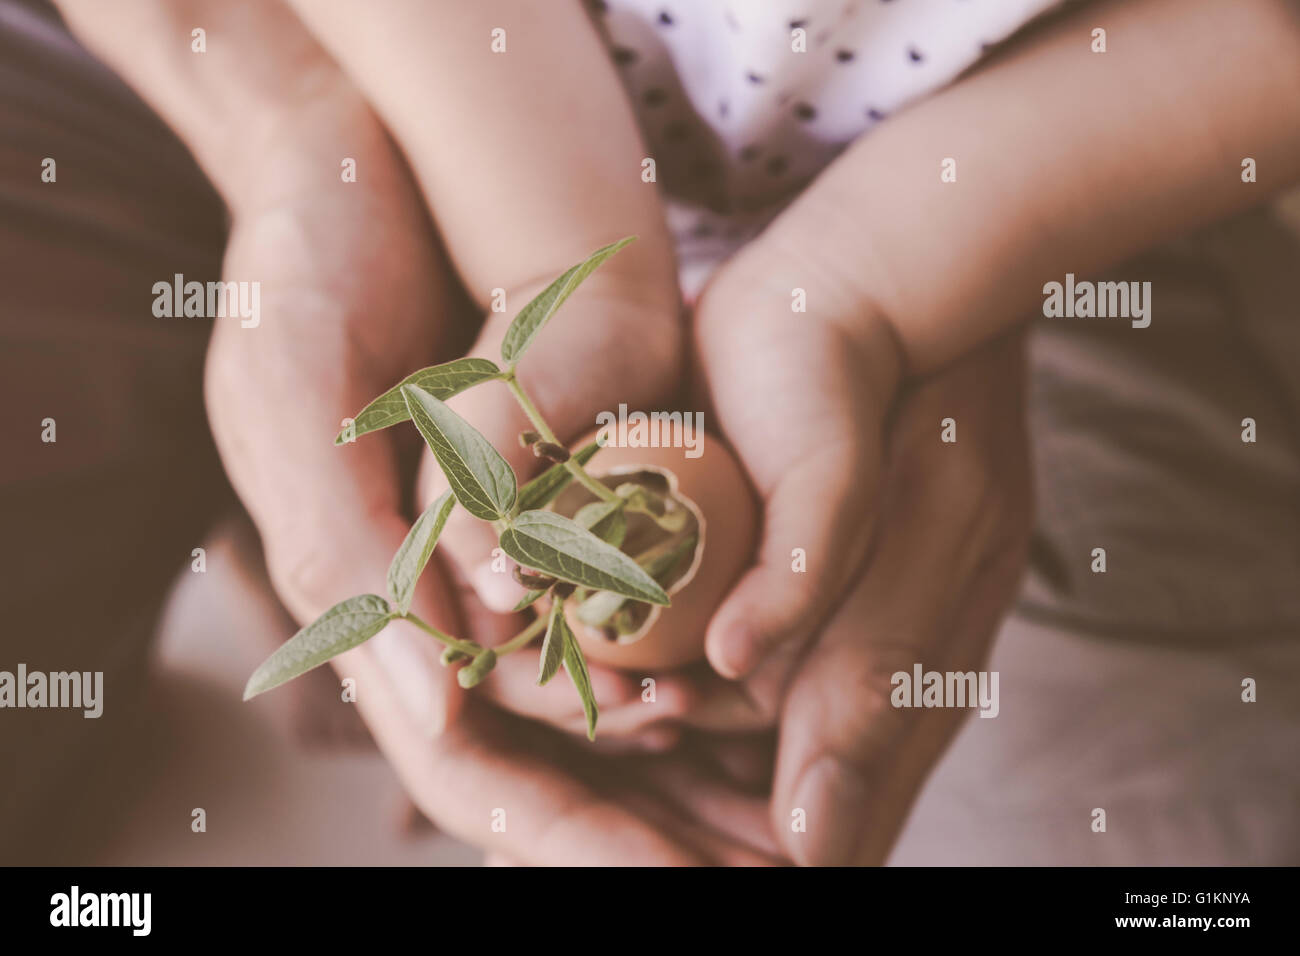 child and parents hands holding young plants in eggshell,soft selective focus Stock Photo